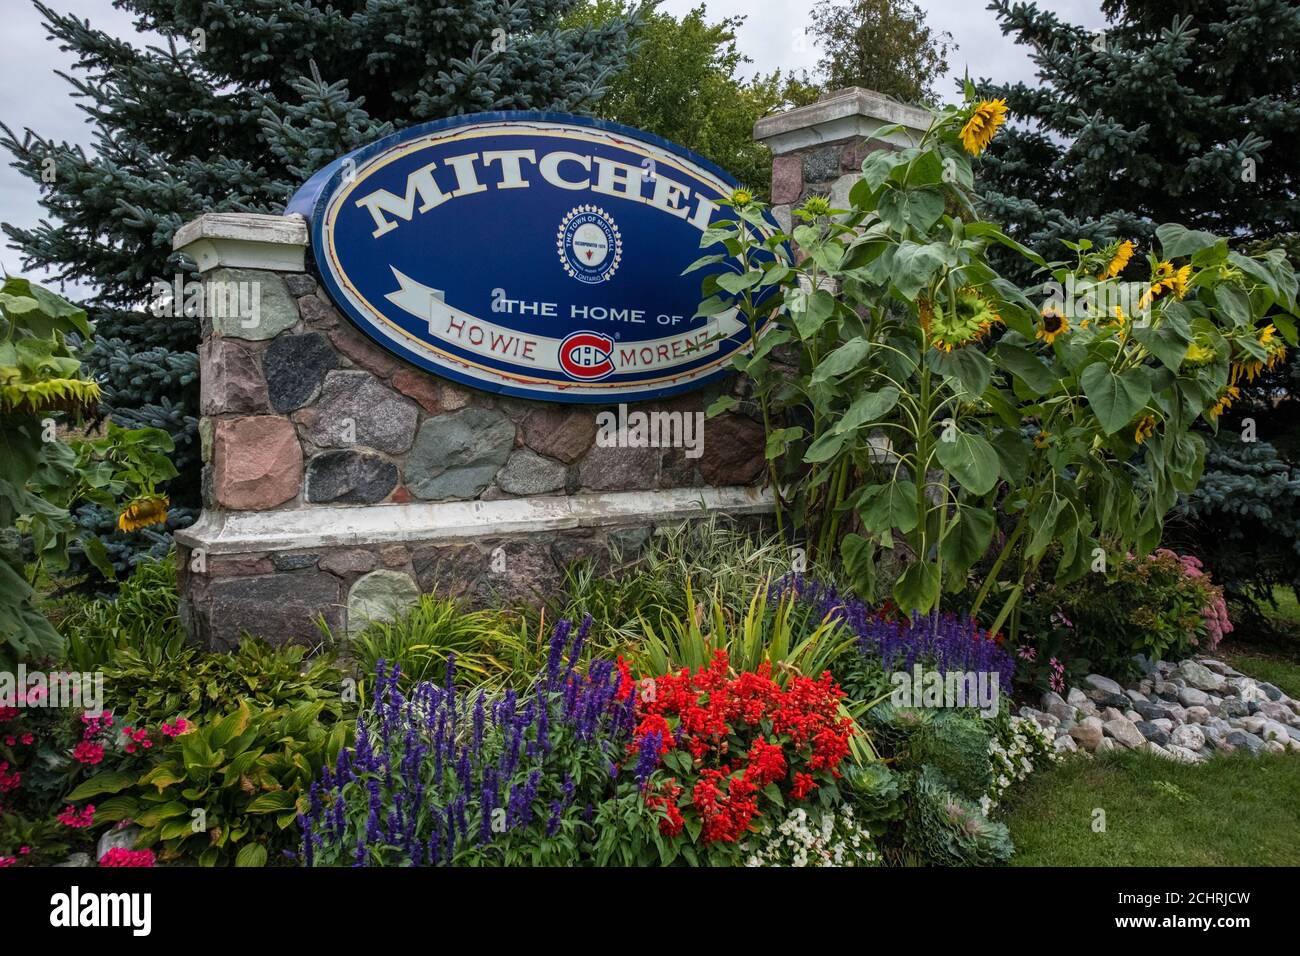 A view of the entrance to the town of Michell, home of Howie Morenz, famous hokey player who made a career with the CH Montreal Canadians. Le Canadien. Stock Photo